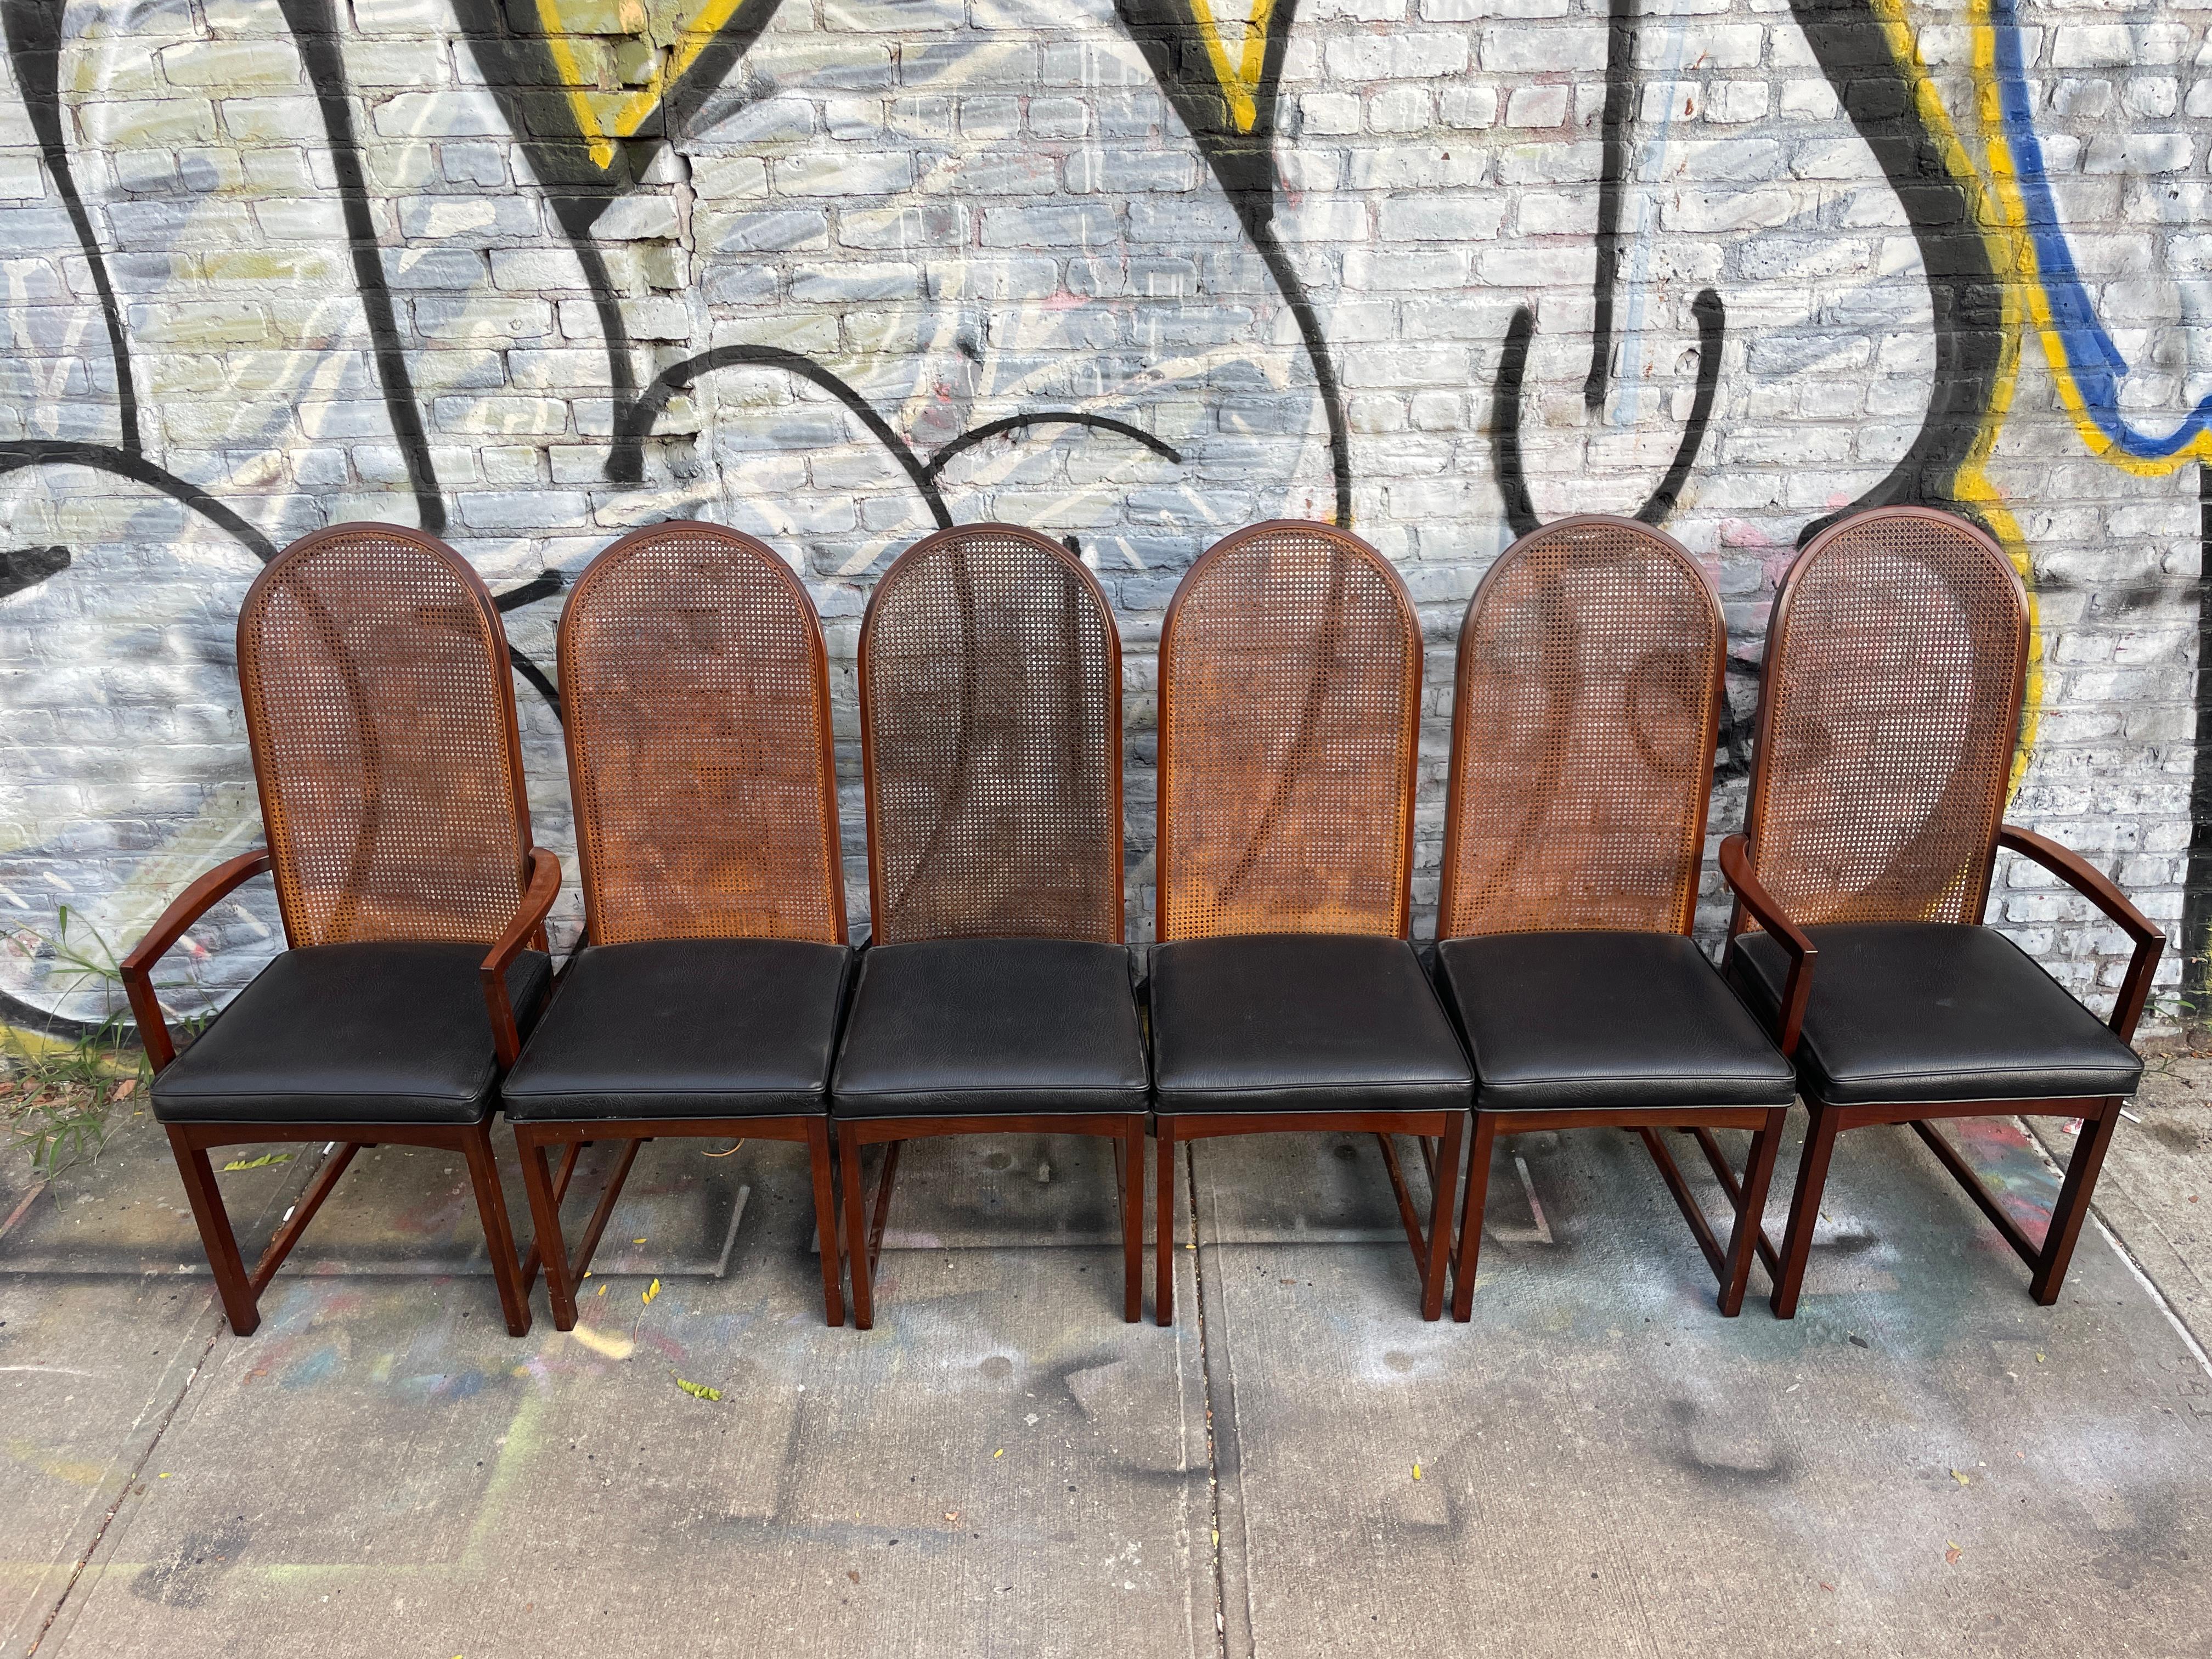 Upholstery Set of 6 Milo Baughman Curved Cane Back Dining Chairs